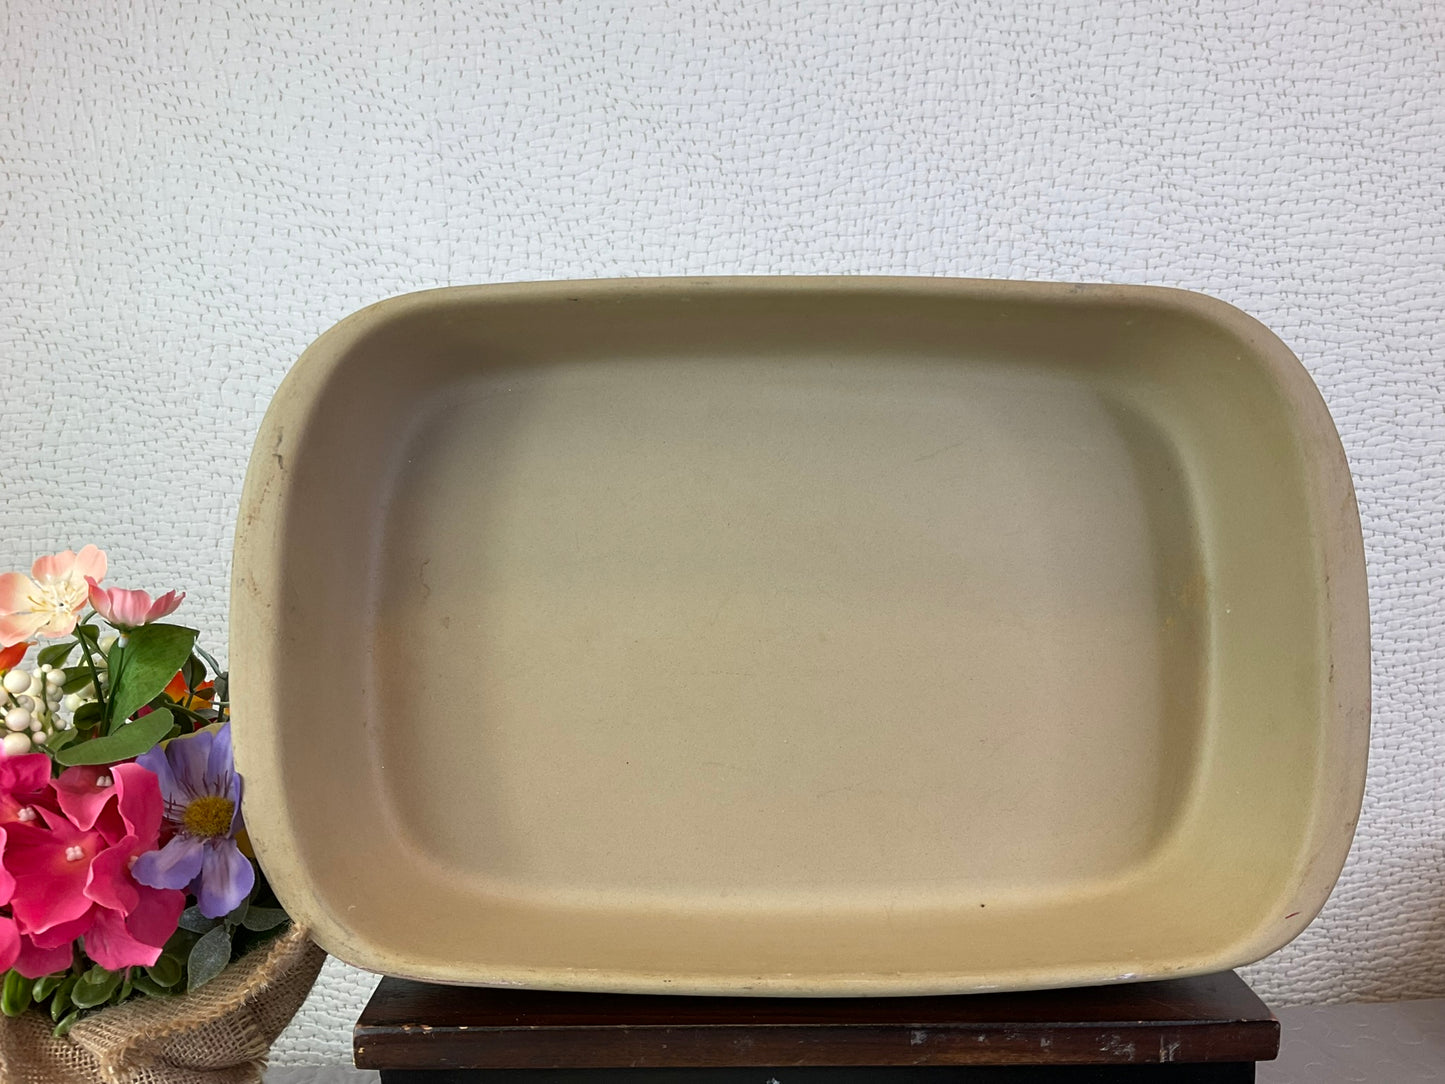 The Pampered Chef Classics Collection Stoneware Baking Dish, 15"x10"